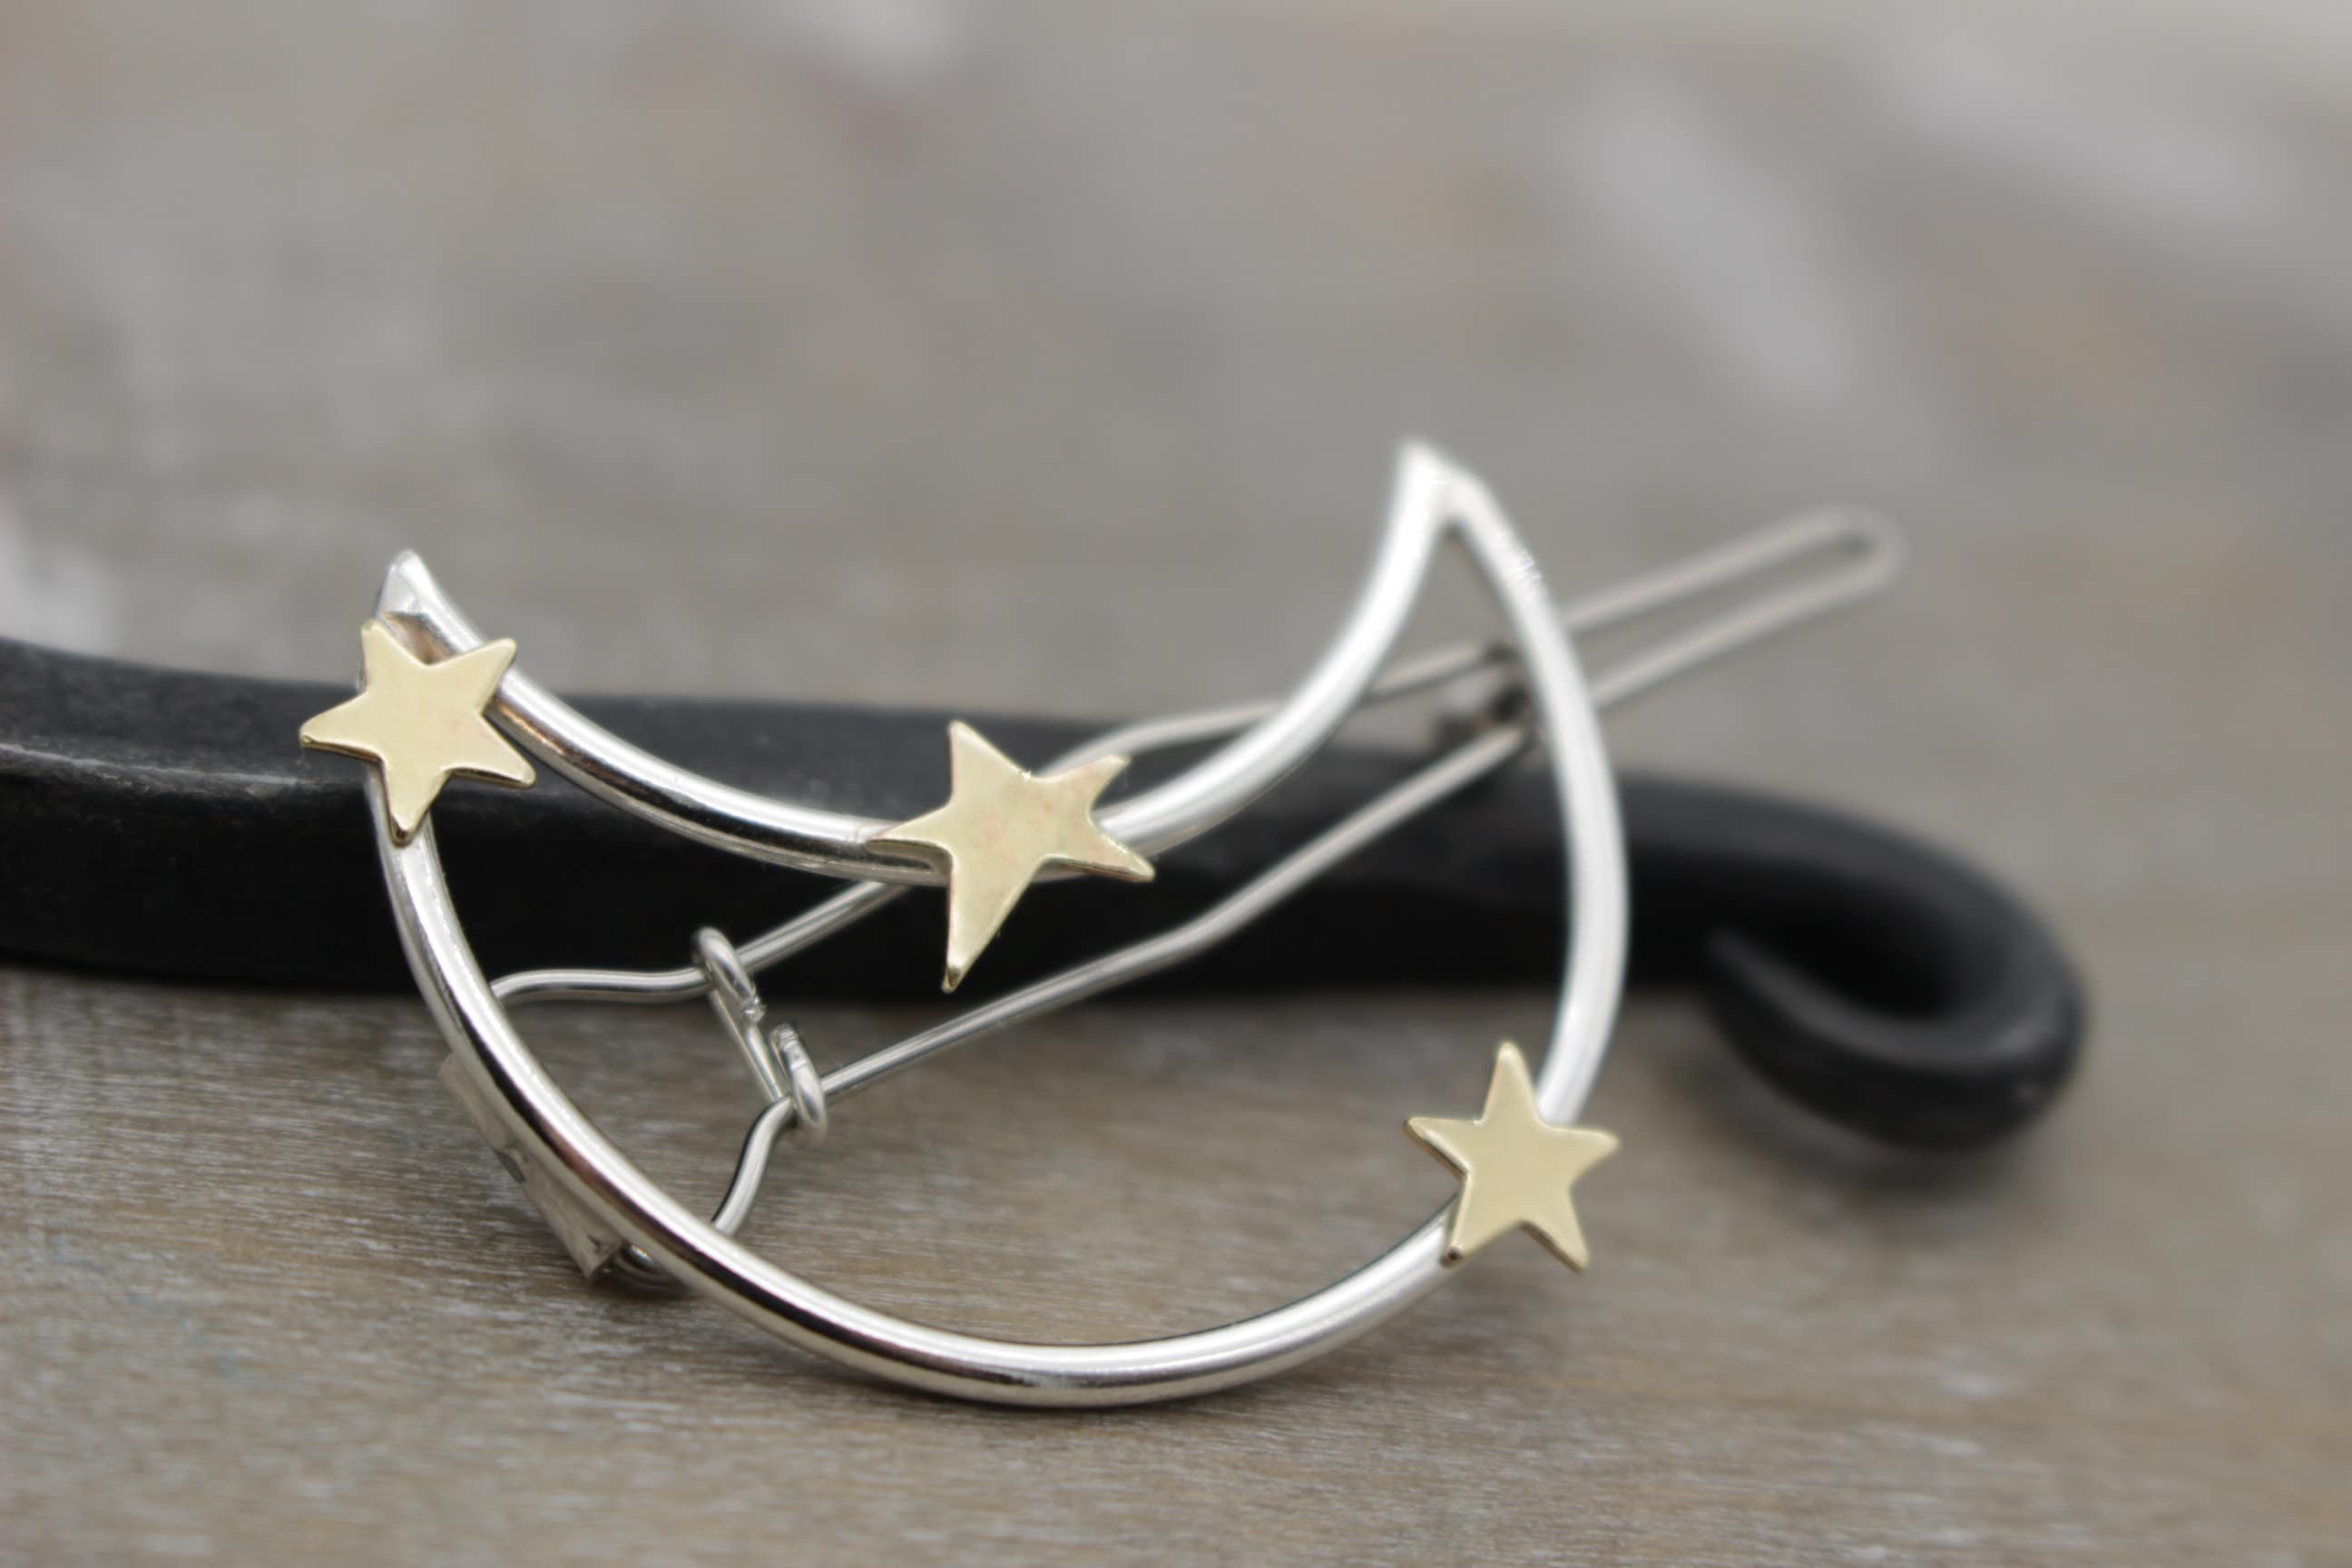 Small Moon and star barrette - Petite silver barrette - Petite crescent moon barrette - gift for her - small barrette - hair jewelry - bangs